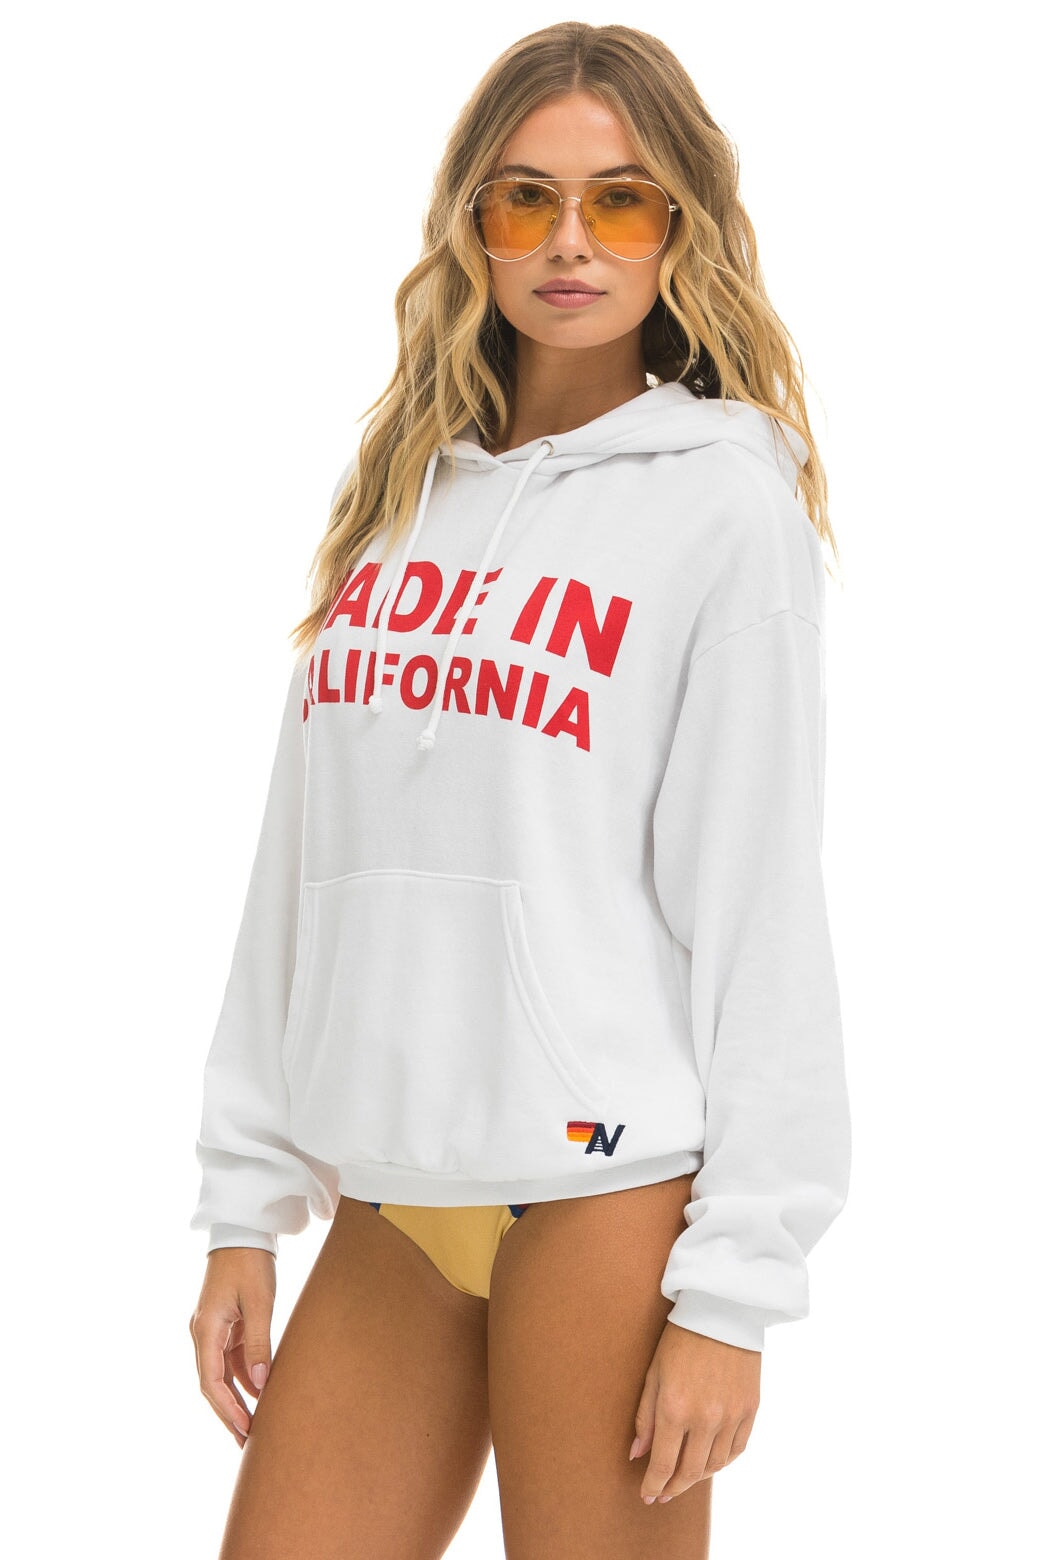 MADE IN CALIFORNIA RELAXED PULLOVER HOODIE - WHITE Hoodie Aviator Nation 